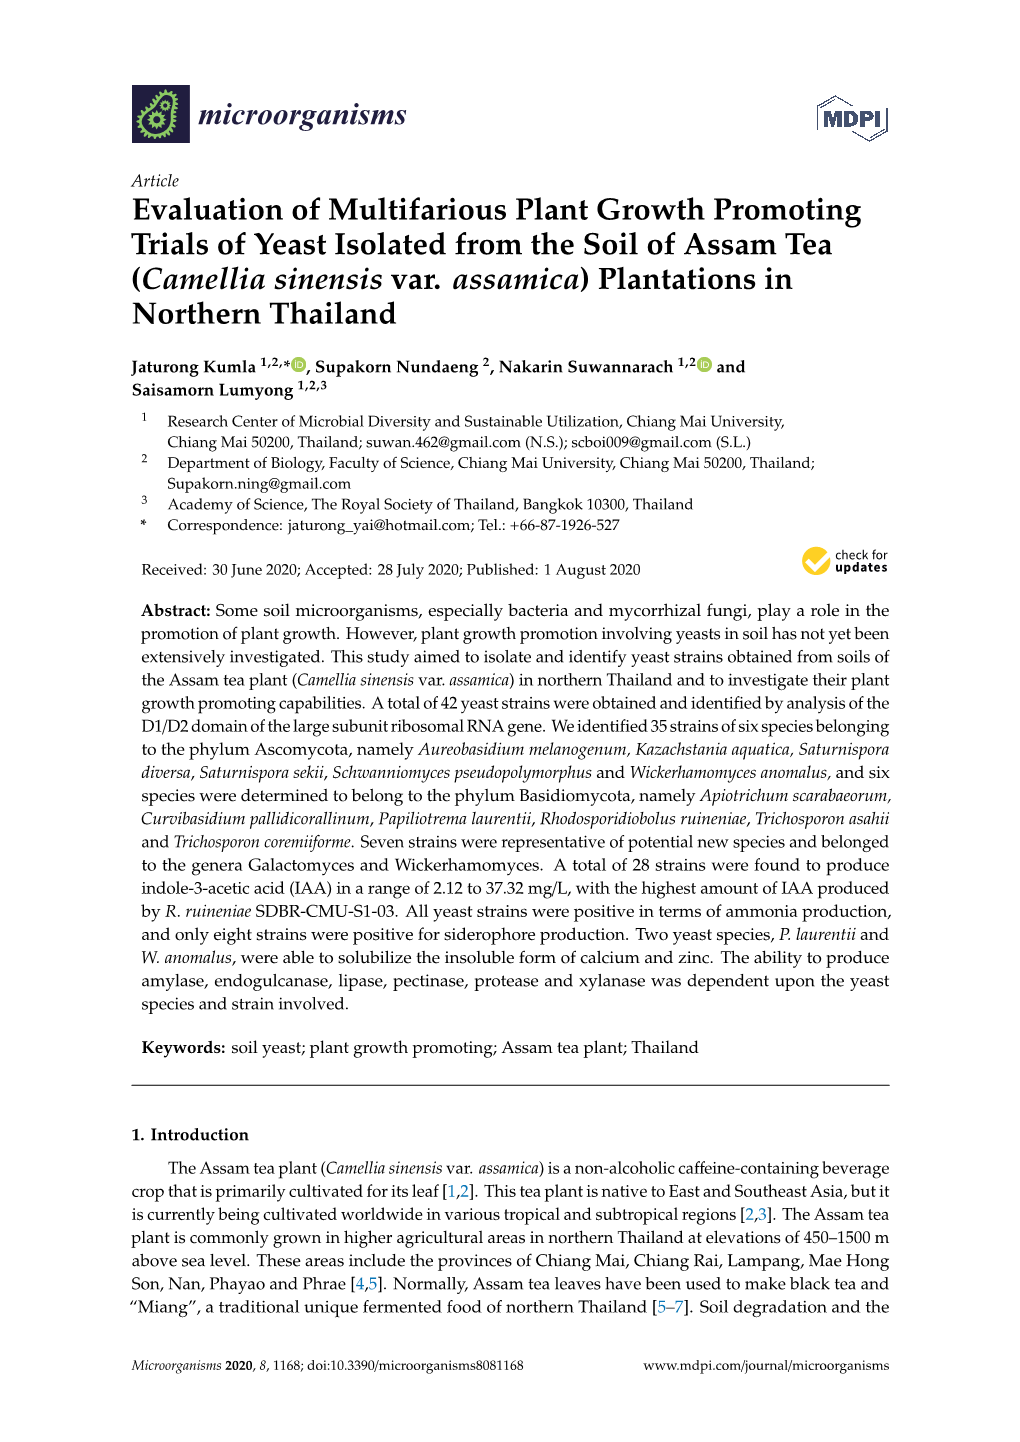 Evaluation of Multifarious Plant Growth Promoting Trials of Yeast Isolated from the Soil of Assam Tea (Camellia Sinensis Var